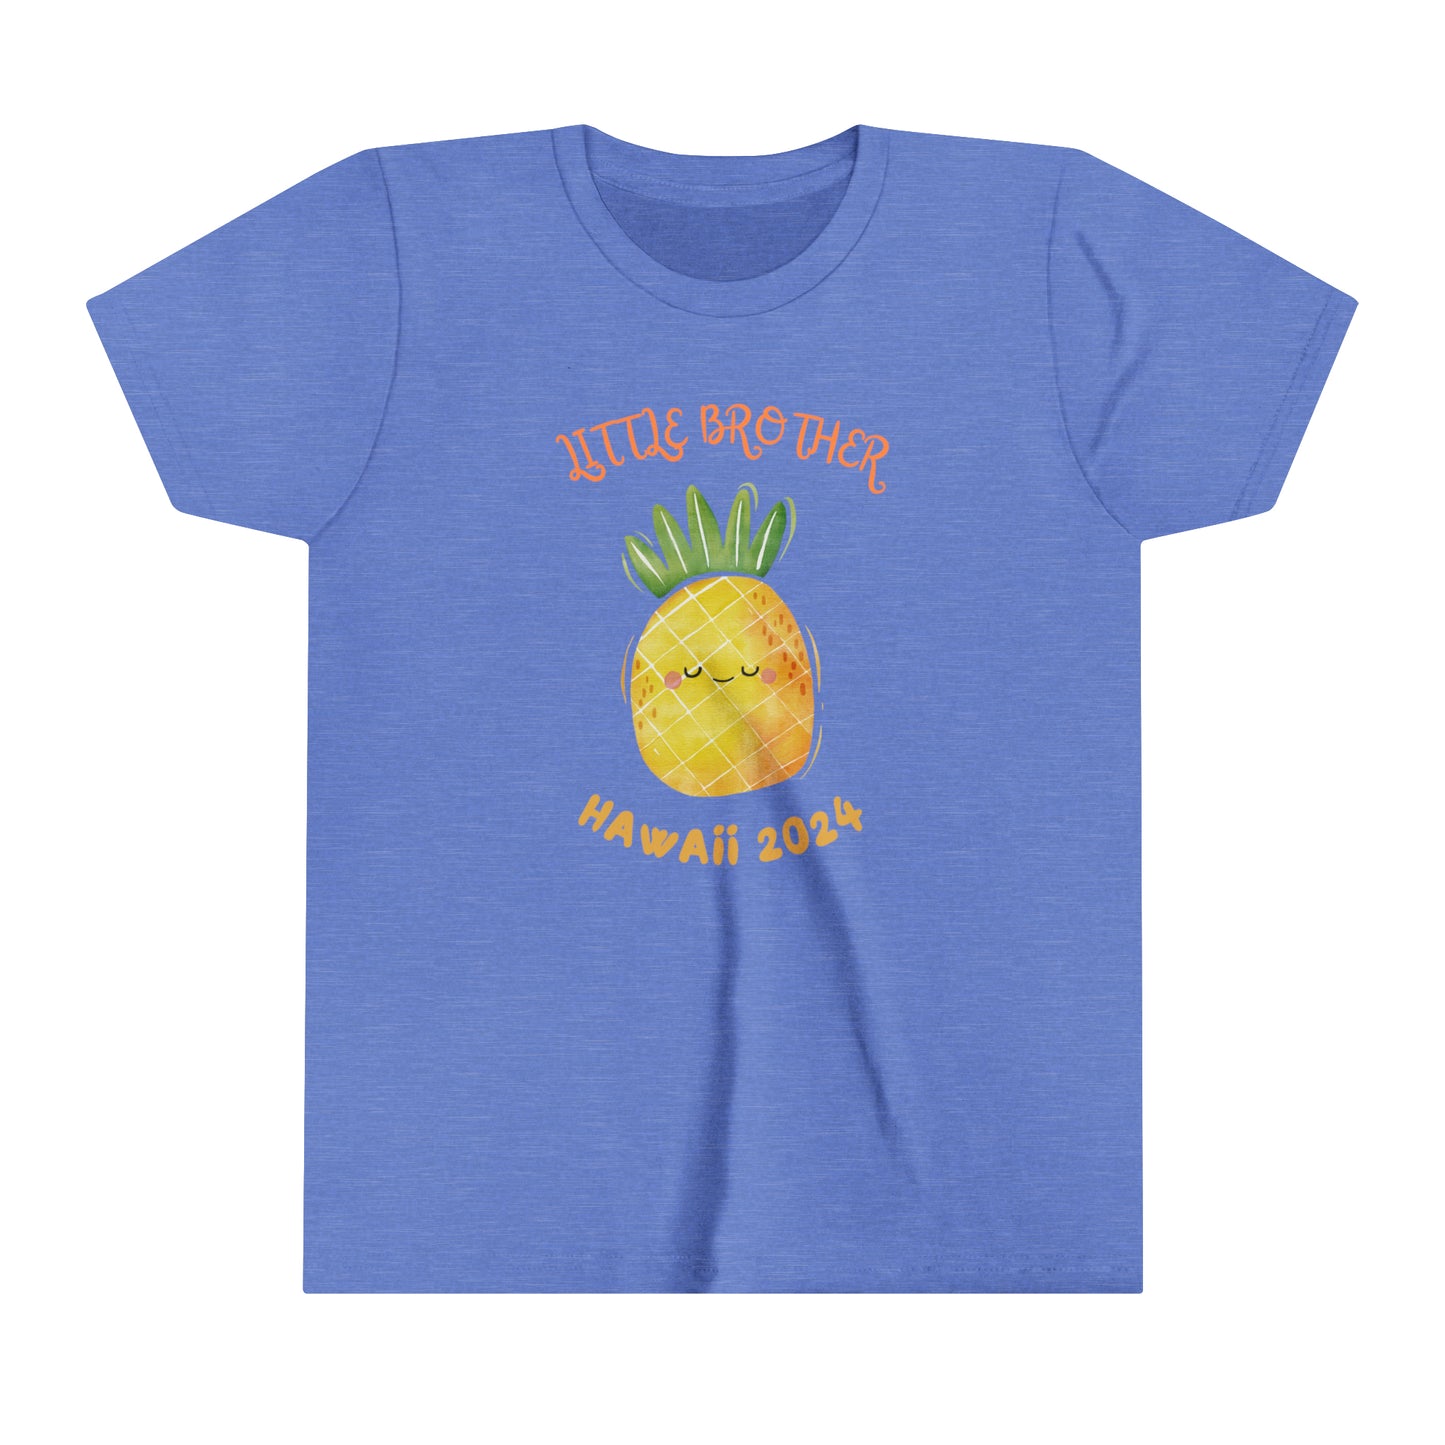 Hawaii 2024 Cute Pineapple Matching Tee KIDS Size - Little Brother